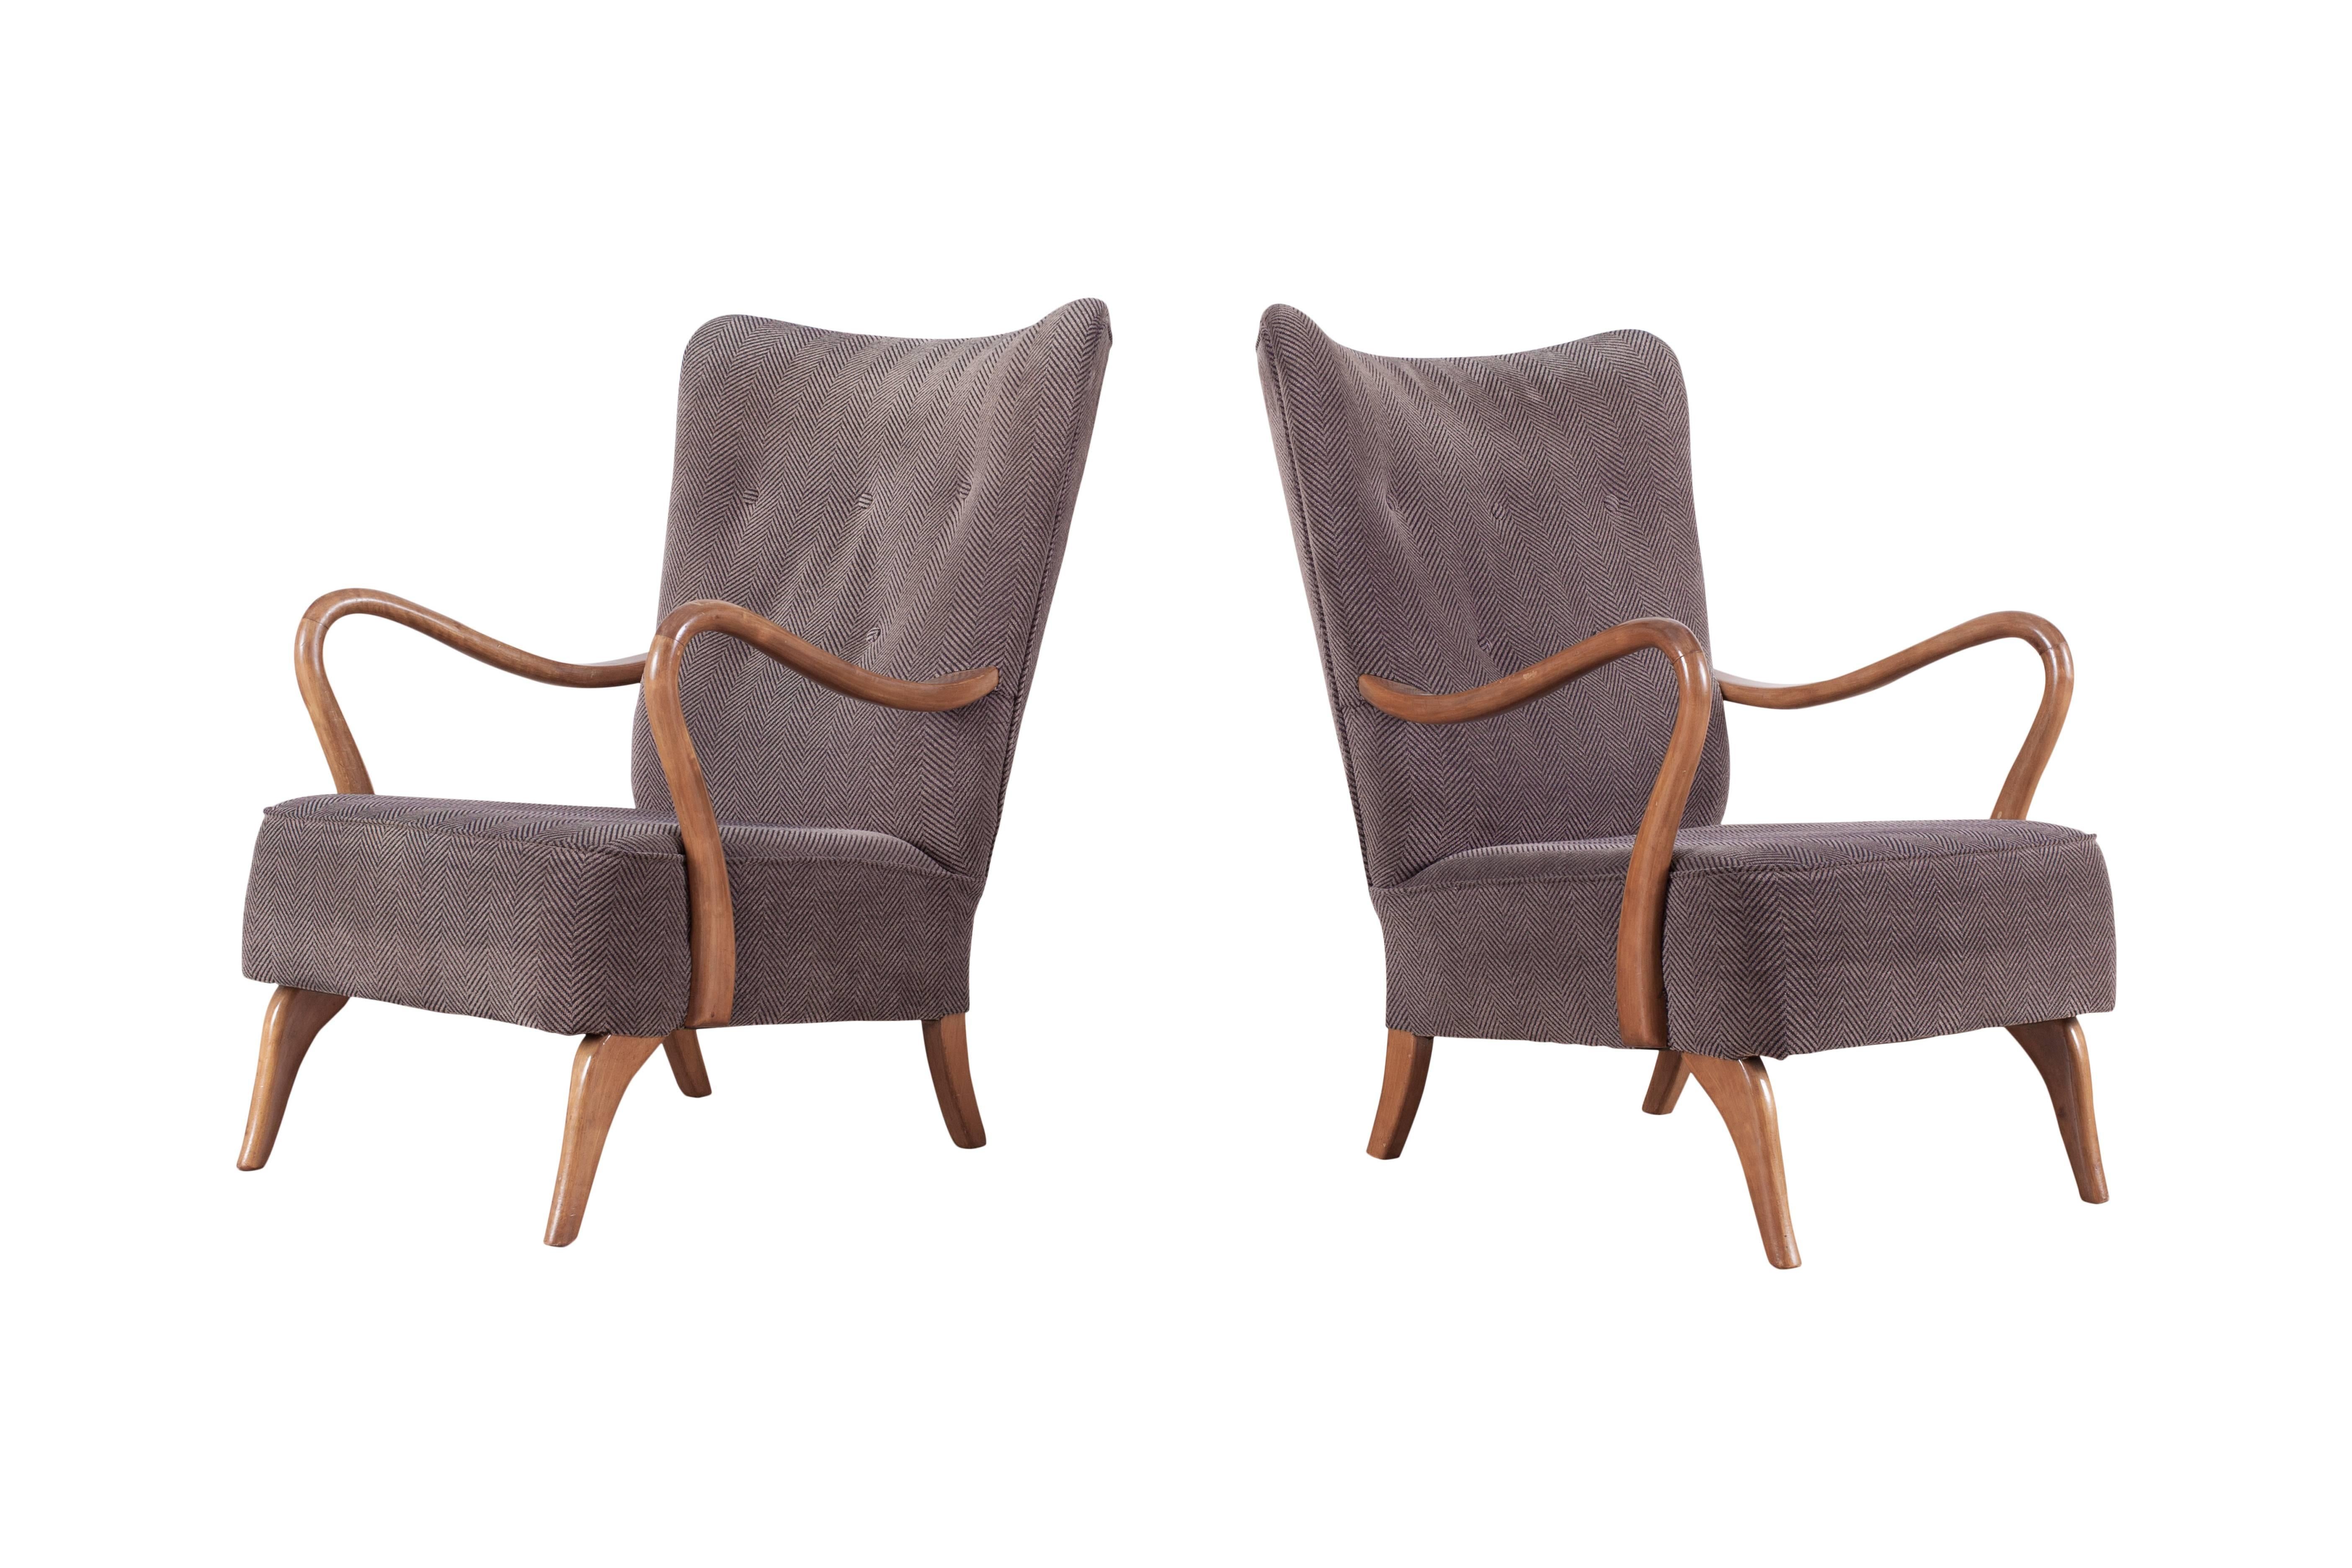 European Mid-century modern Scandinavian Easy Chairs from the 1950s